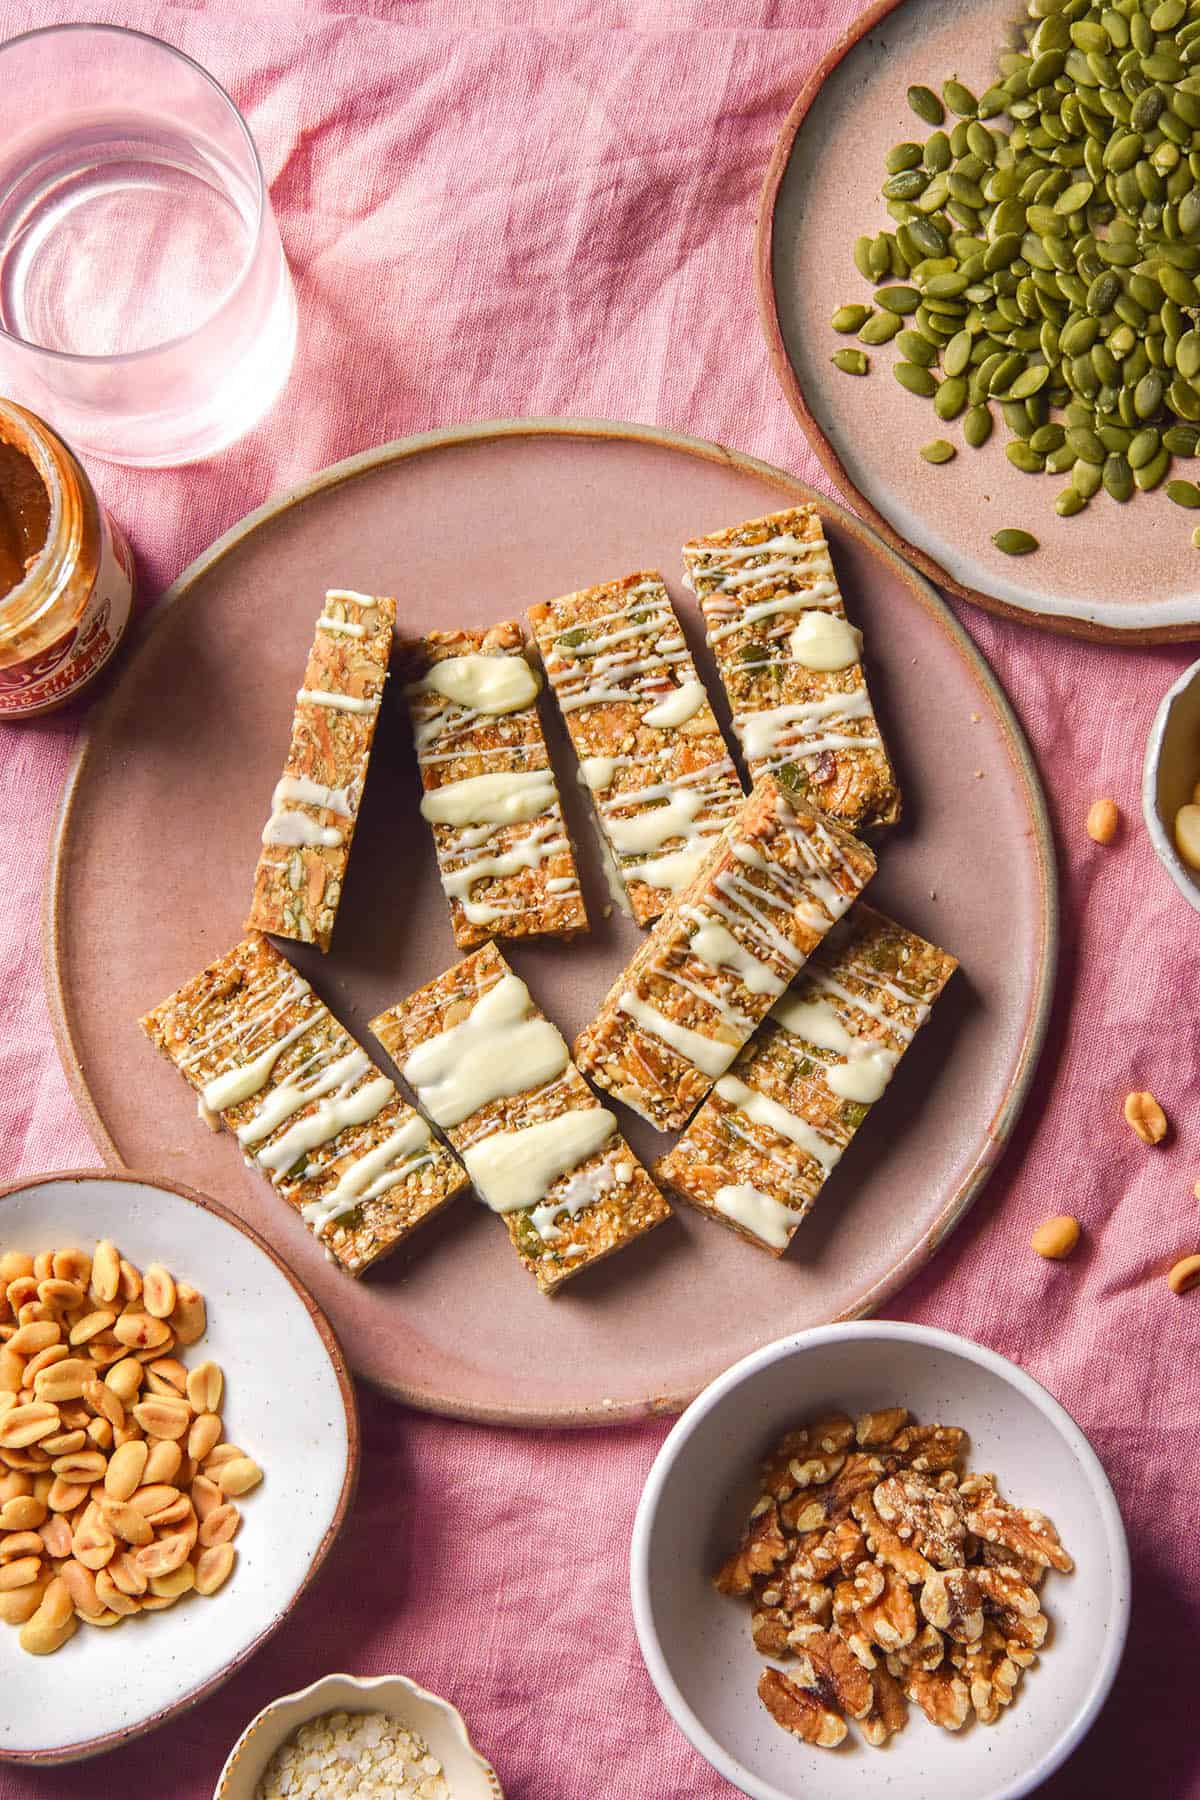 An aerial image of a pale pink ceramic plate of gluten free granola bars drizzled with white chocolate. The plate sits atop a pale pink linen tablecloth and is surrounded by small bowls of nuts and seeds and a glass of water